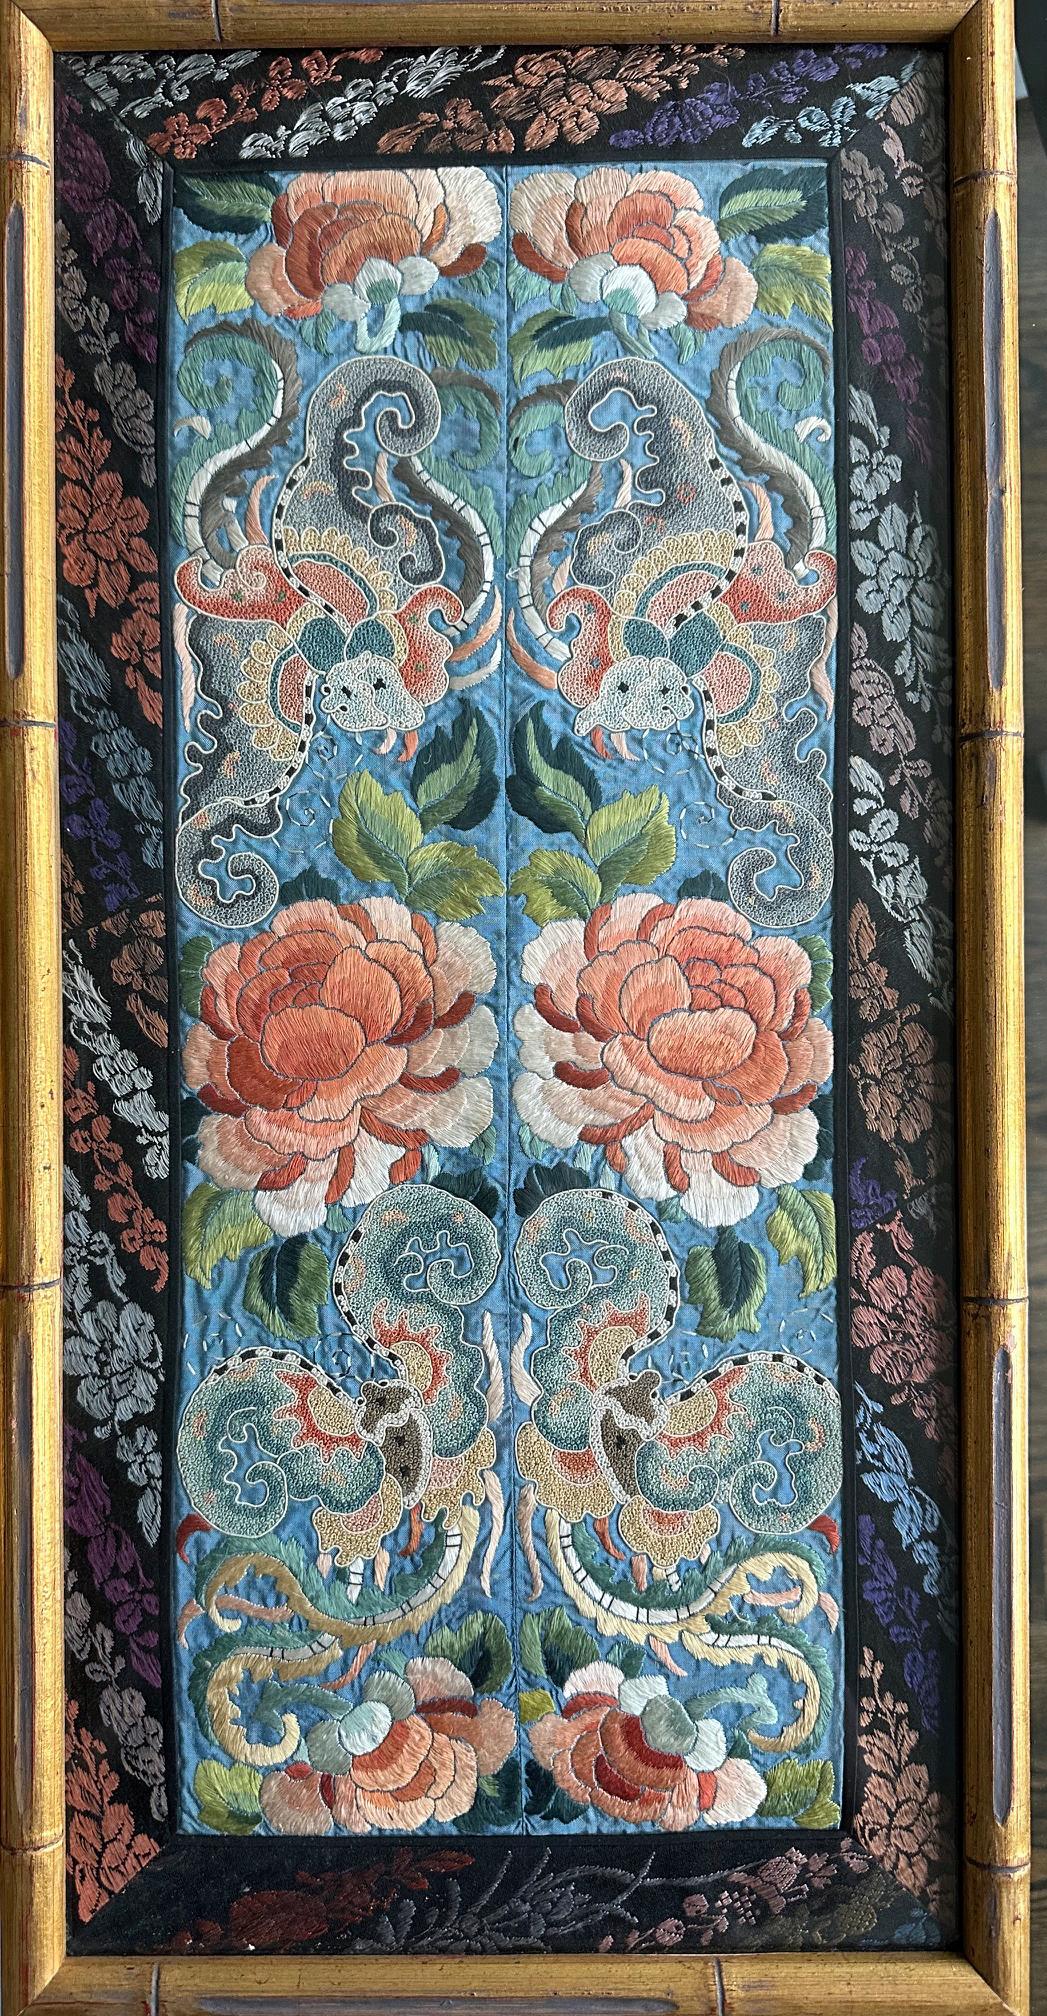 A pair of framed antique Chinese embroidery textile panels circa 19th century of Qing Dynasty. Each piece features two mirror-matching panels (likely designated to be the sleeves), finely embroidered with colored threads and mounted in embroidered